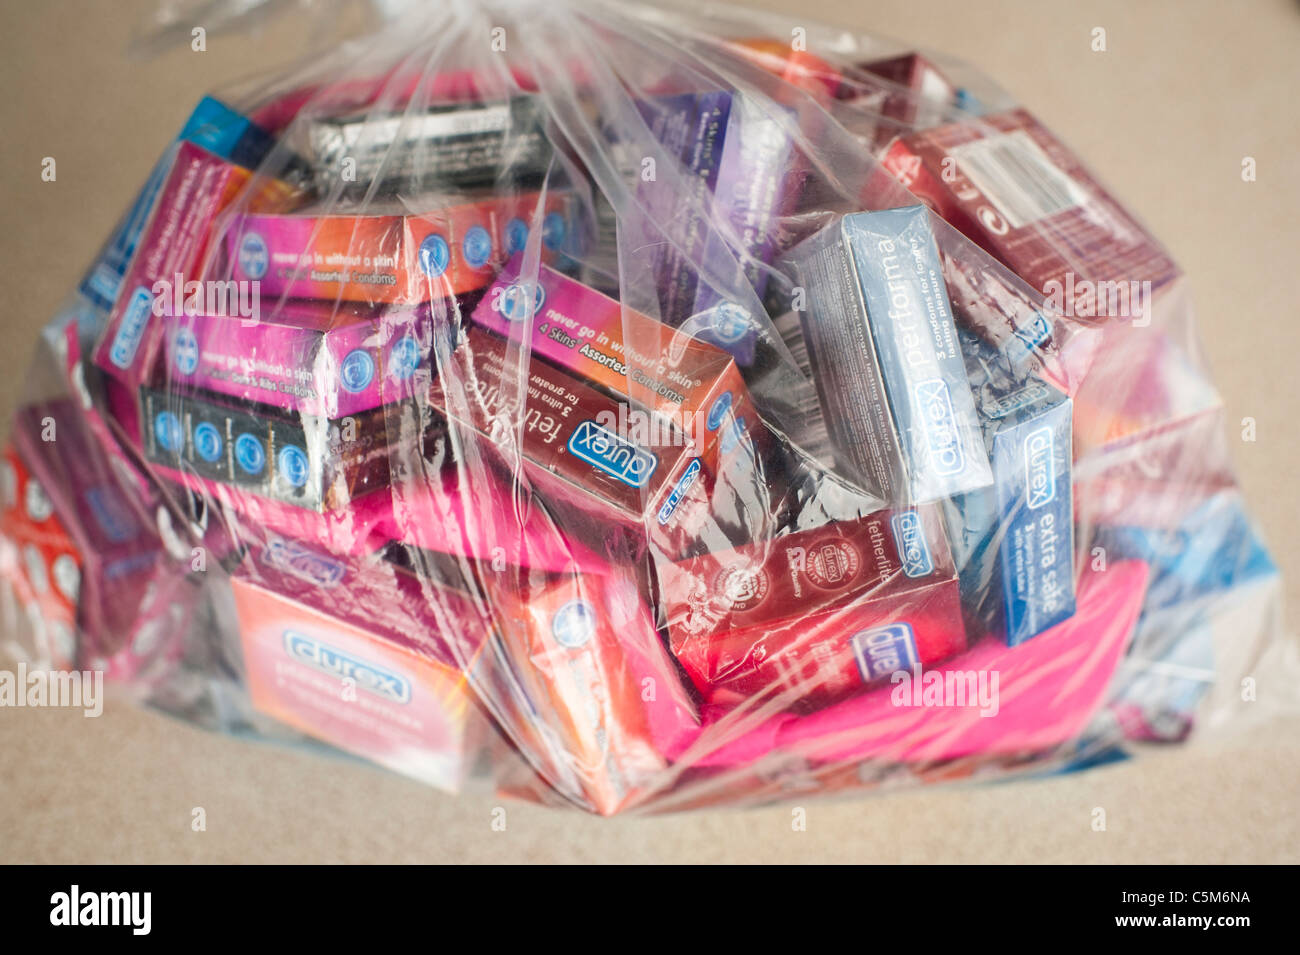 a plastic bag full of packs of various types of condoms, uk Stock Photo -  Alamy